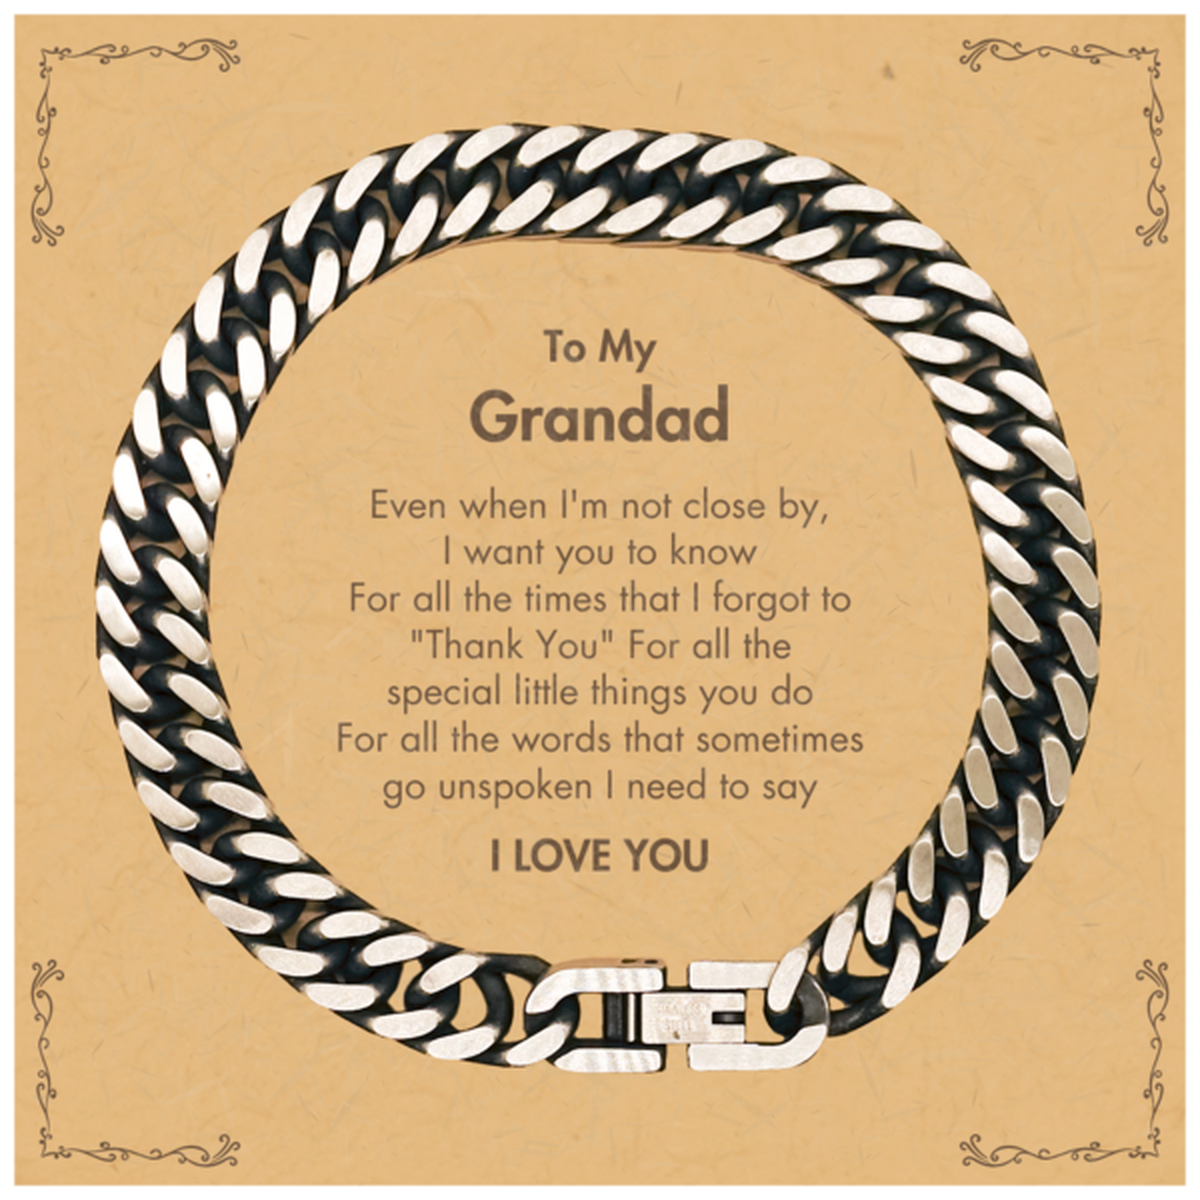 Thank You Gifts for Grandad, Keepsake Cuban Link Chain Bracelet Gifts for Grandad Birthday Mother's day Father's Day Grandad For all the words That sometimes go unspoken I need to say I LOVE YOU